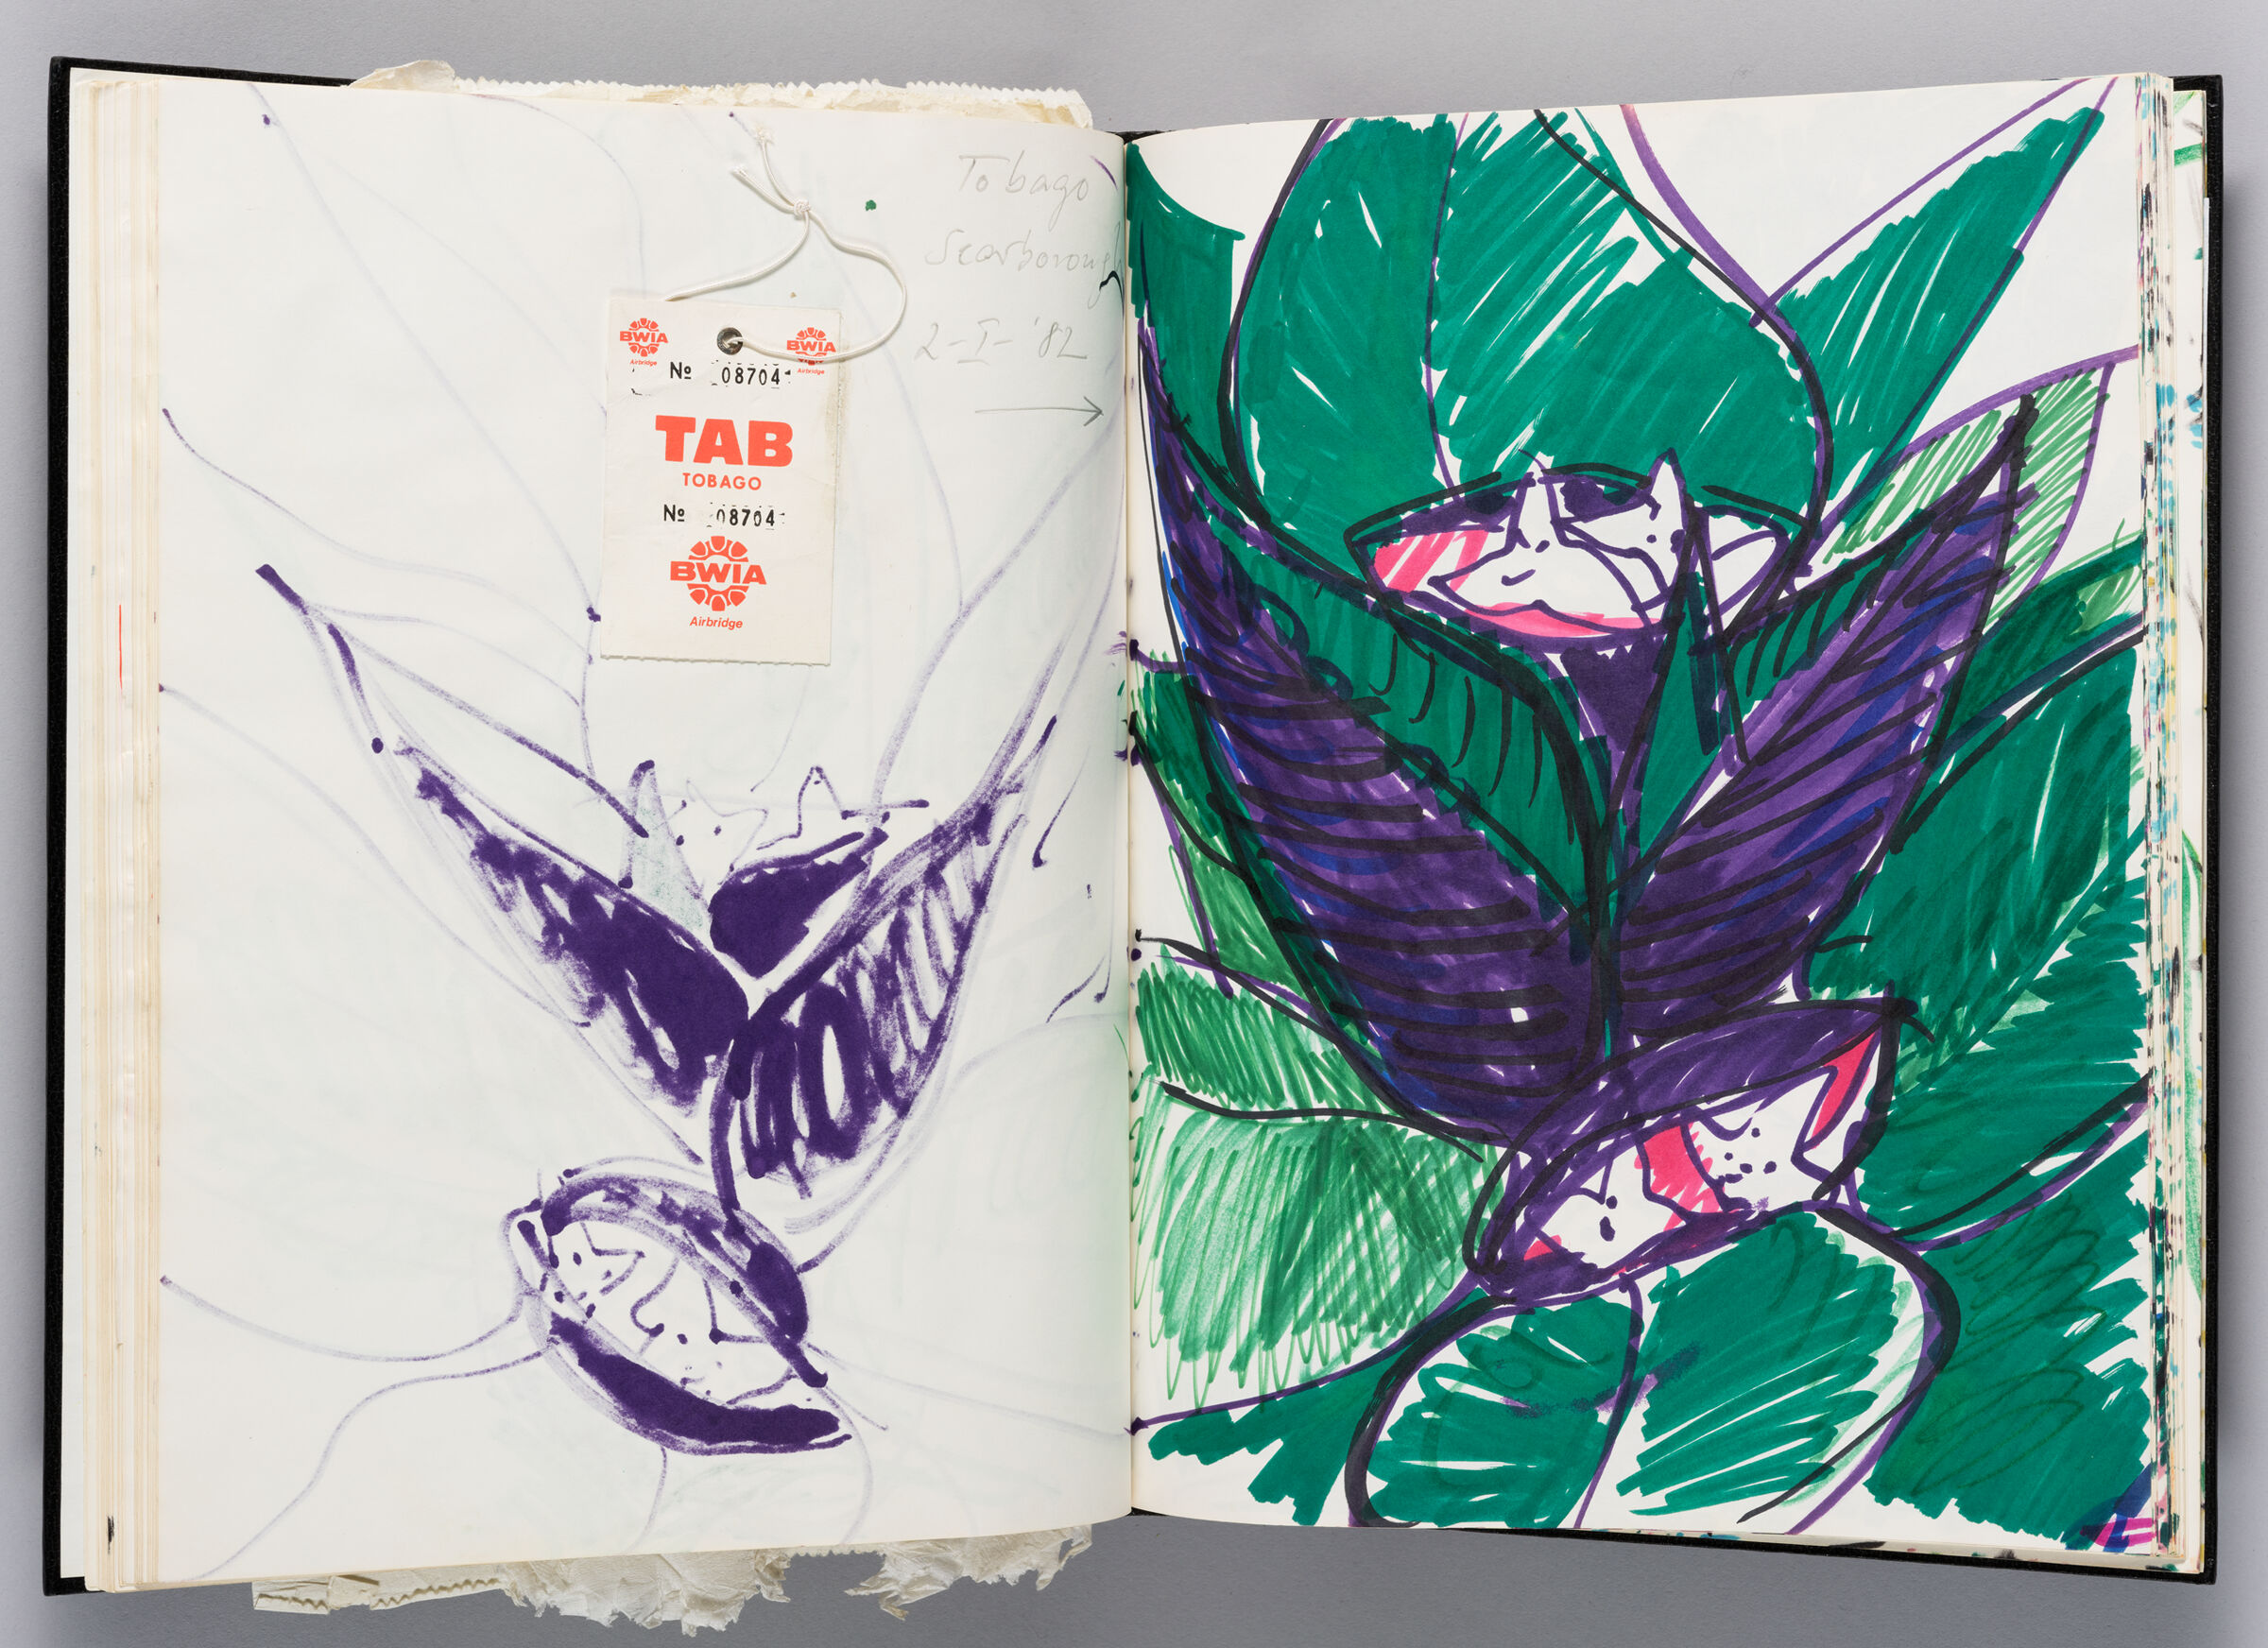 Untitled (Bleed-Through Of Previous Page With Note And Travel Document, Left Page); Untitled (Plant, Right Page)